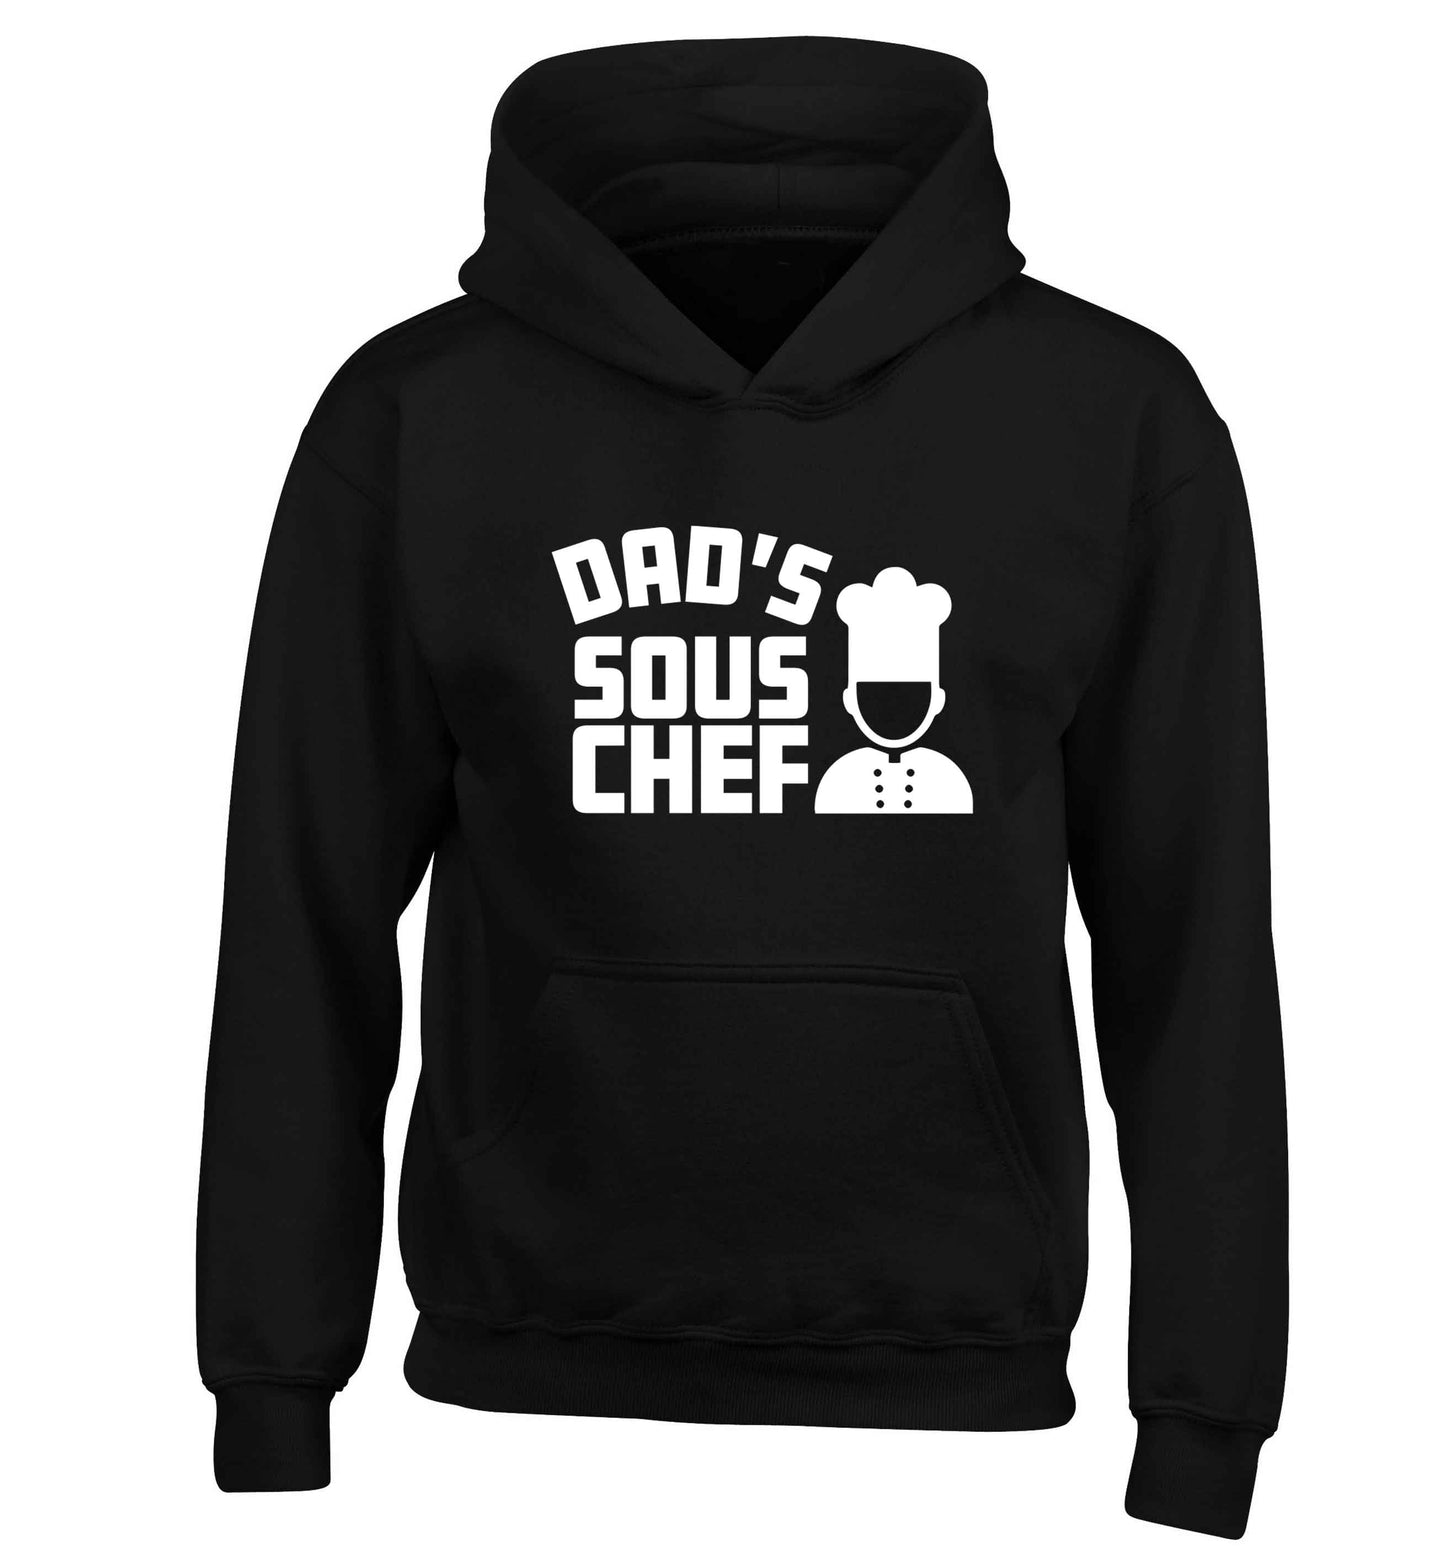 Dad's sous chef children's black hoodie 12-13 Years